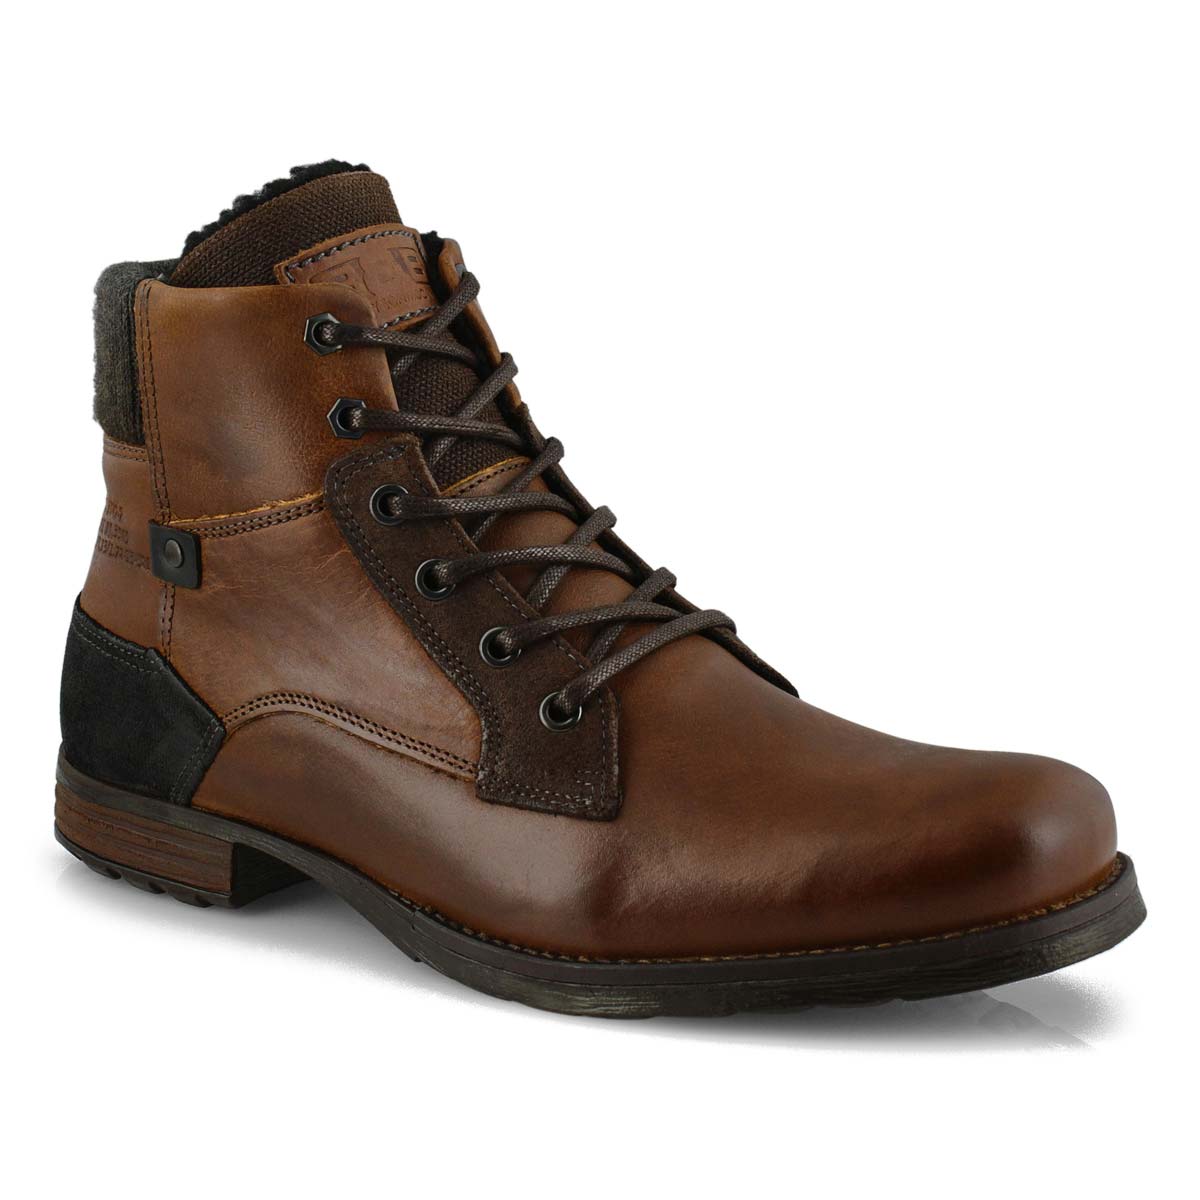 Men's Clinton Lace Up Ankle Boot - Brown